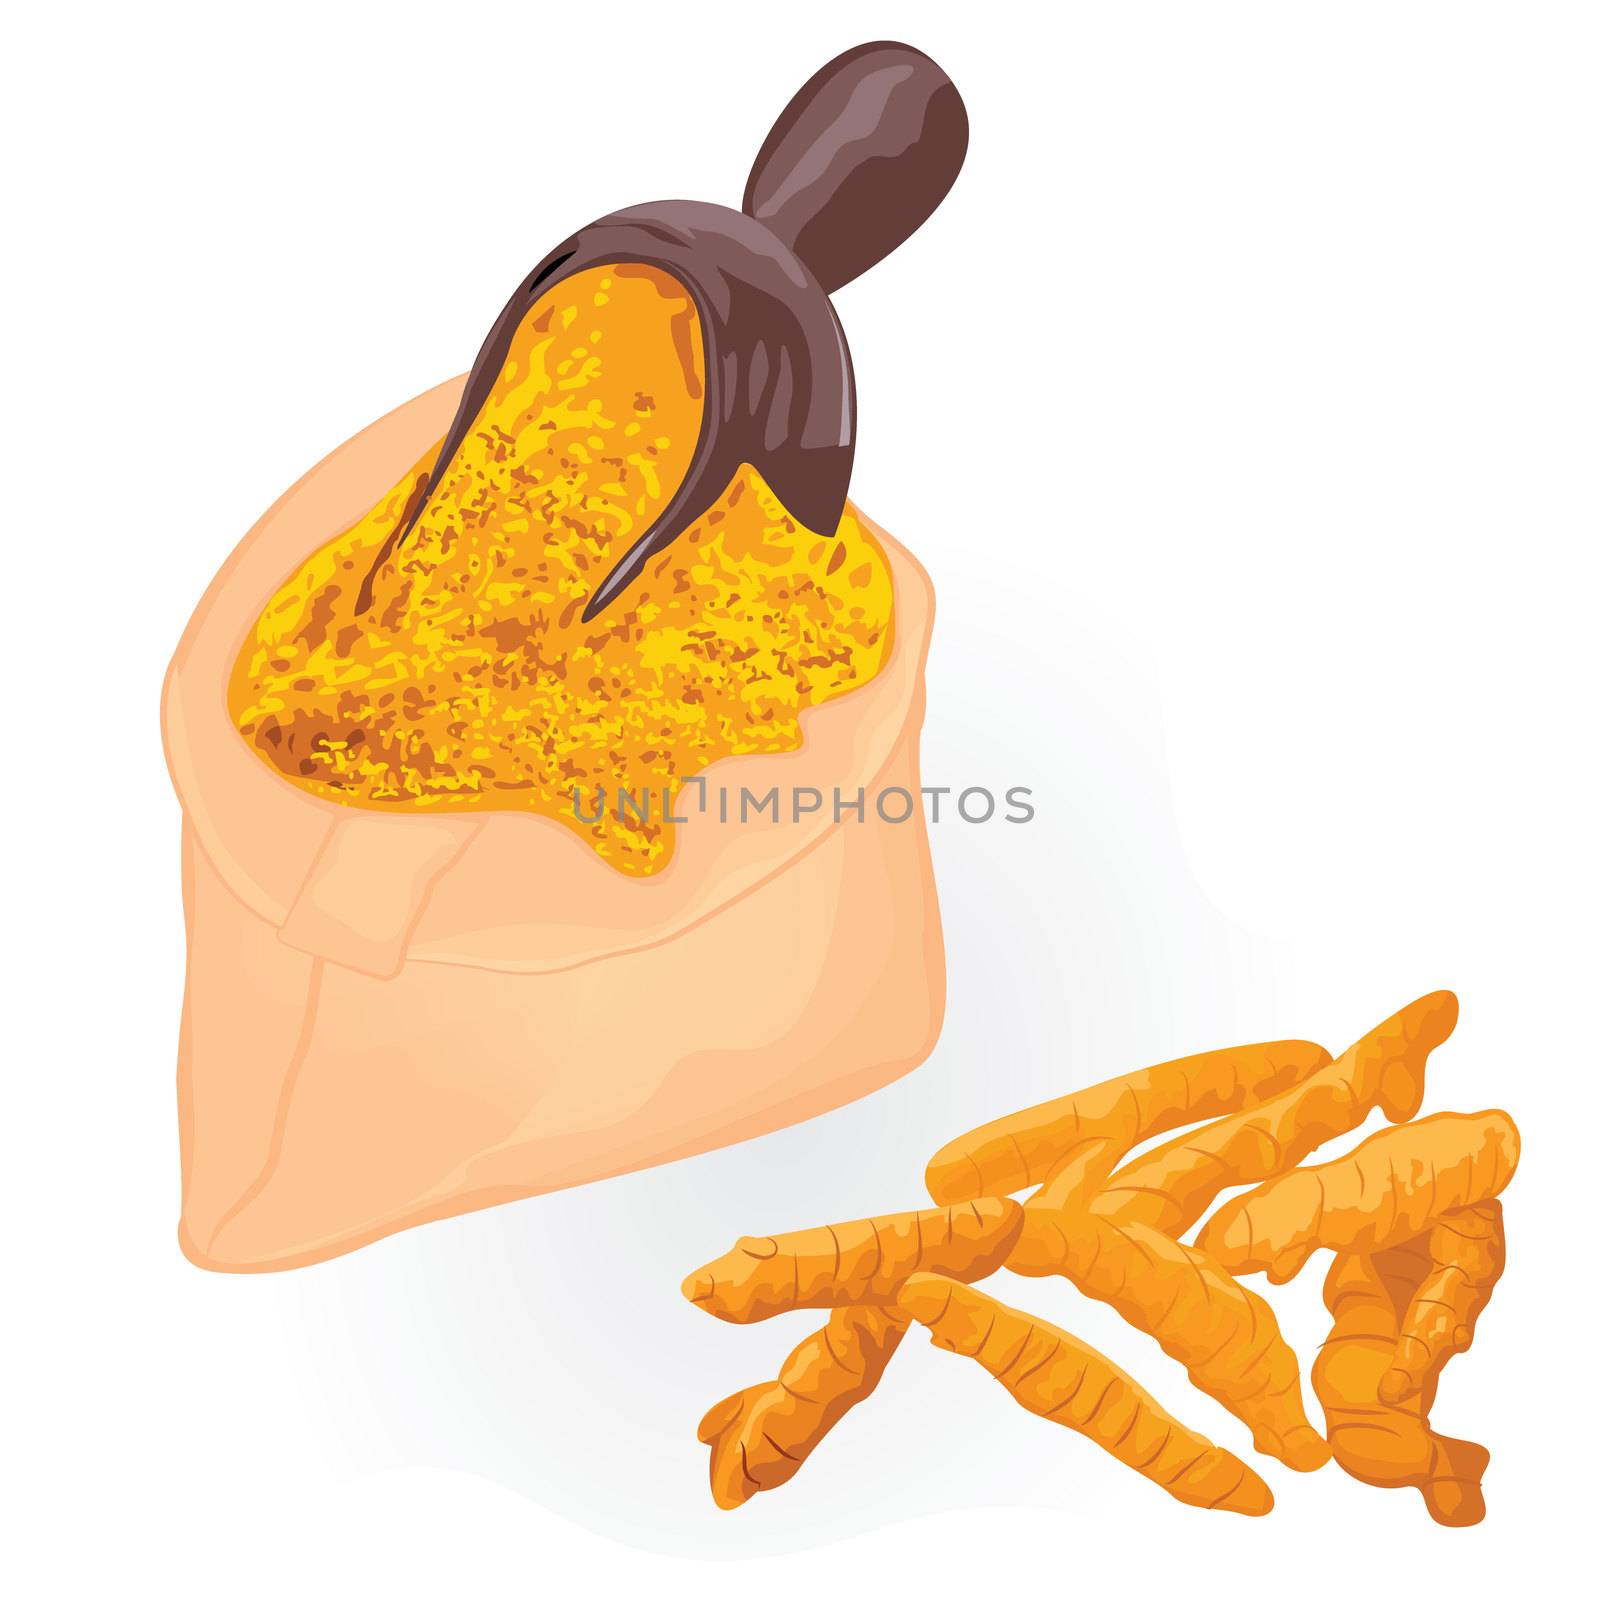 Turmeric roots and powder in a bag on a white background vector illustration